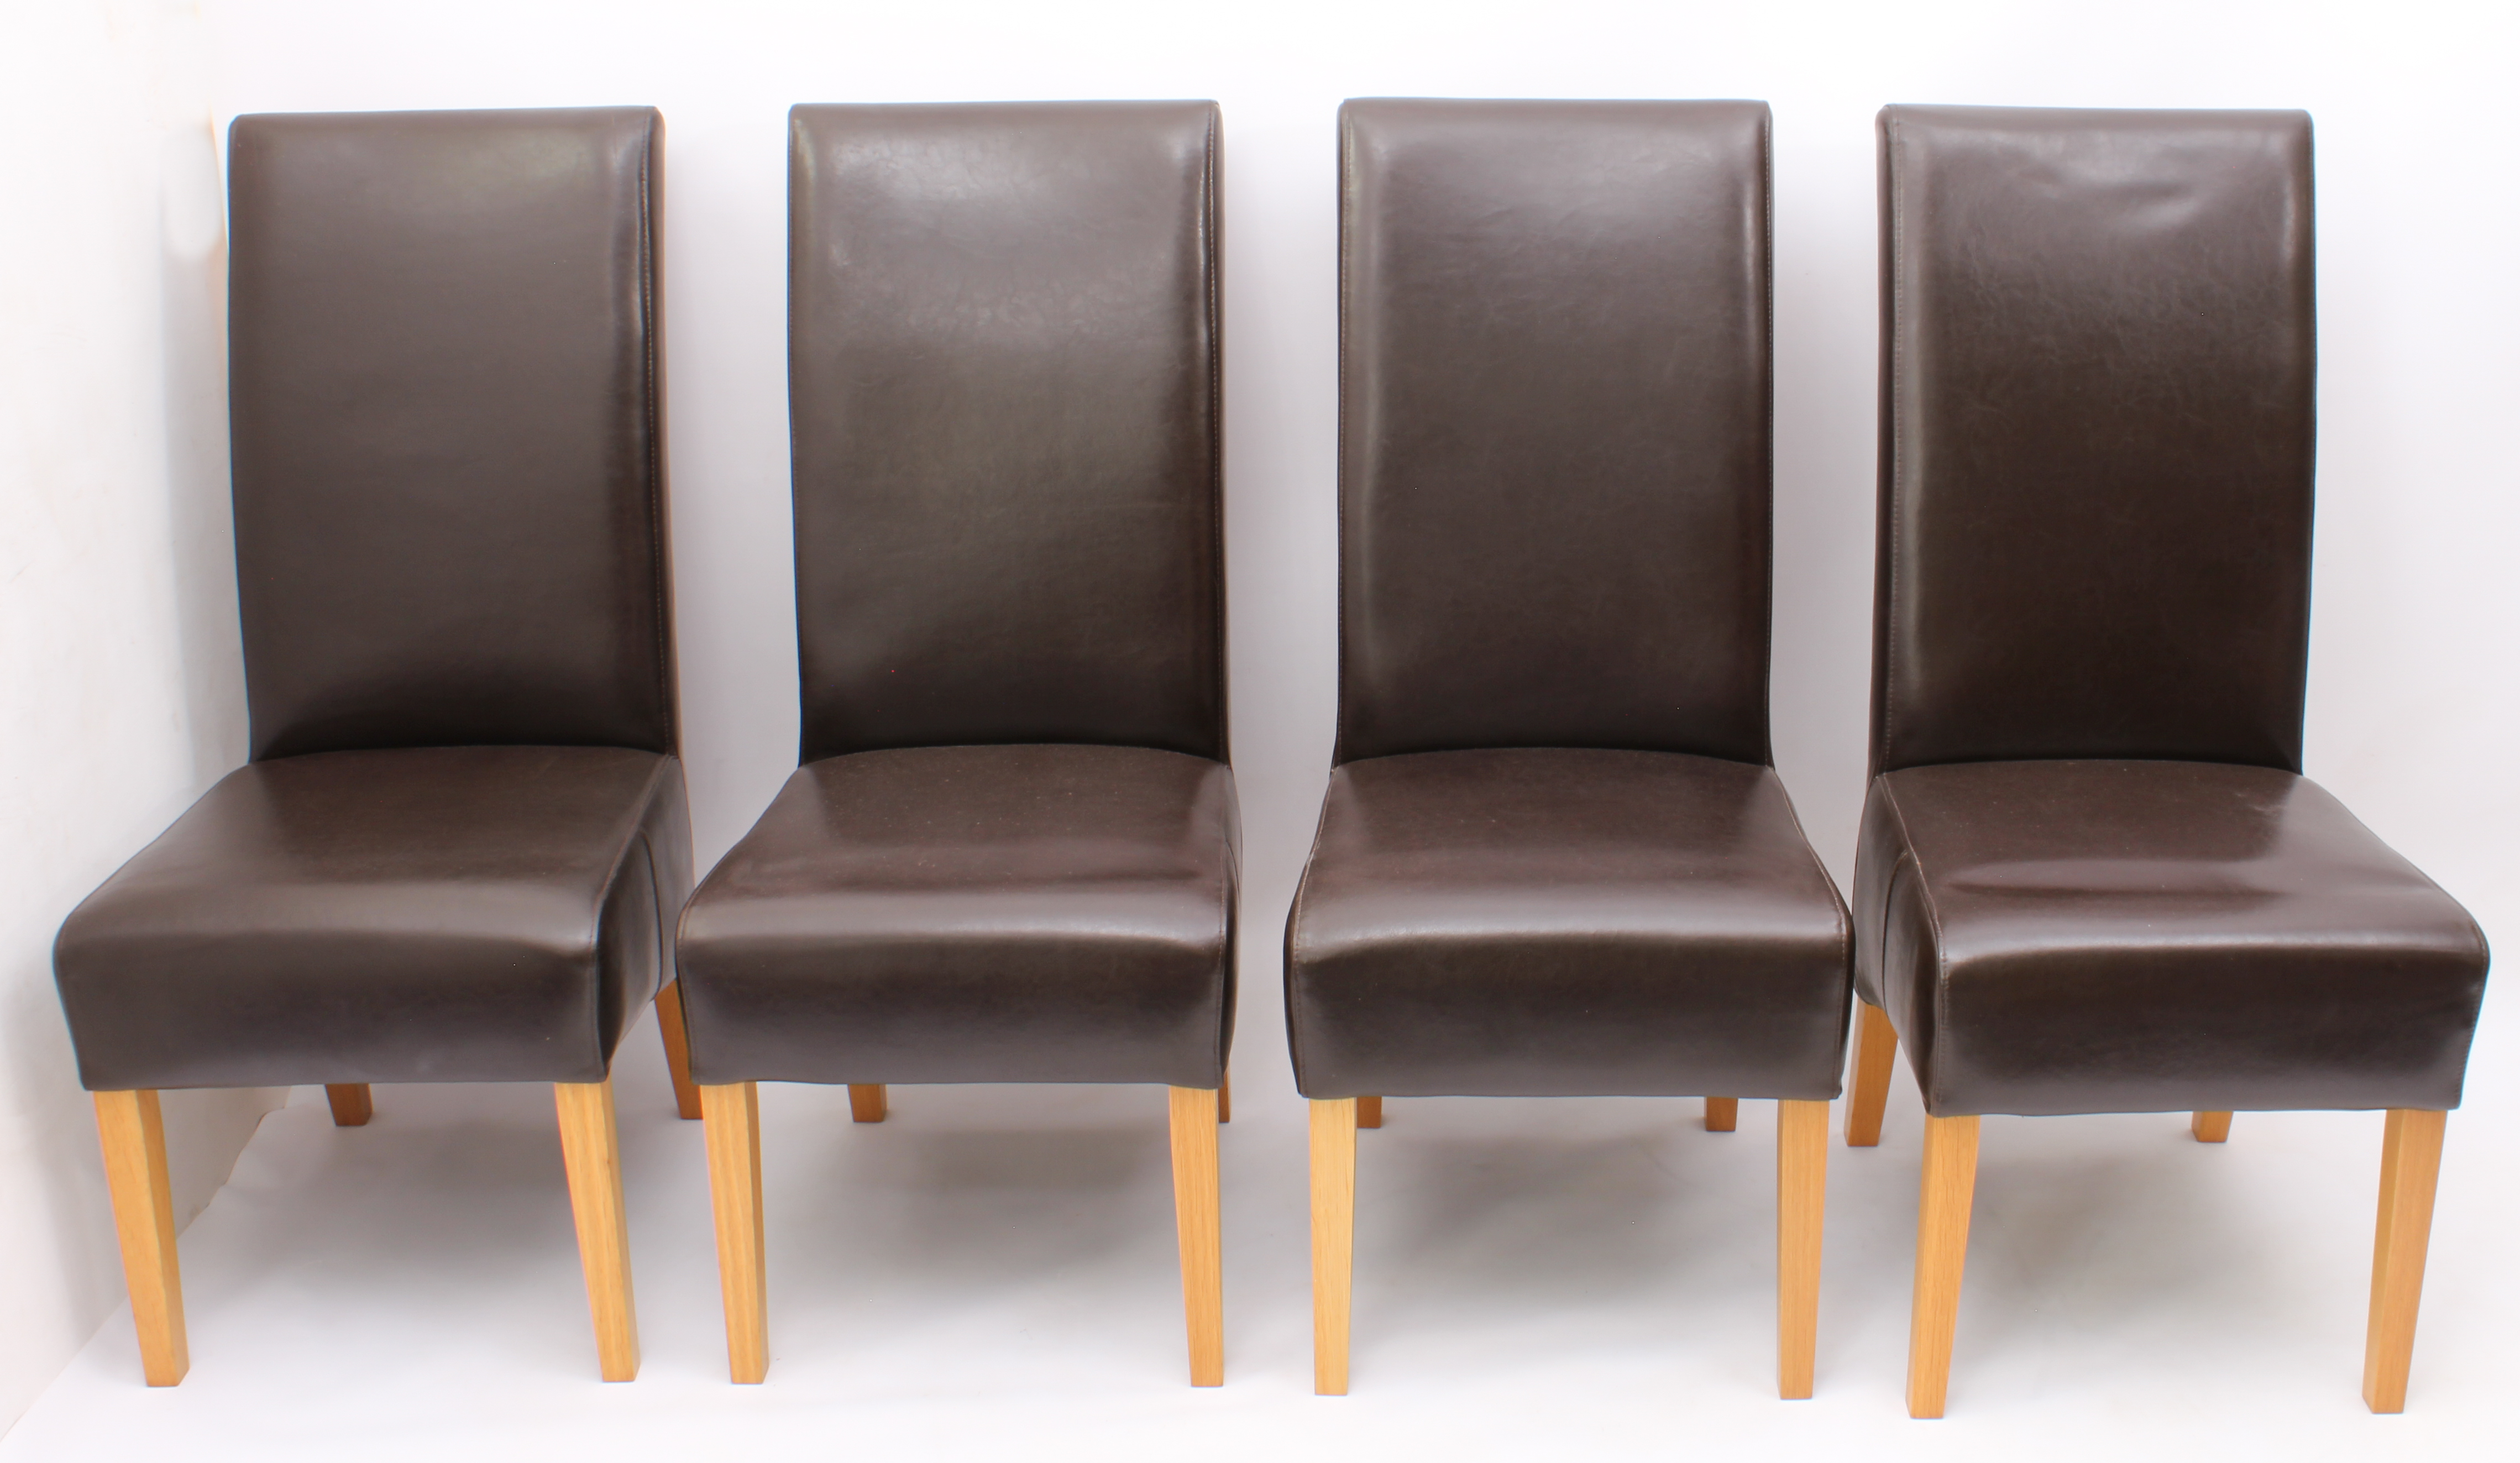 A set of four chocolate-brown leather and oak high-back dining chairs - modern, 48 cm wide, 108.5 cm